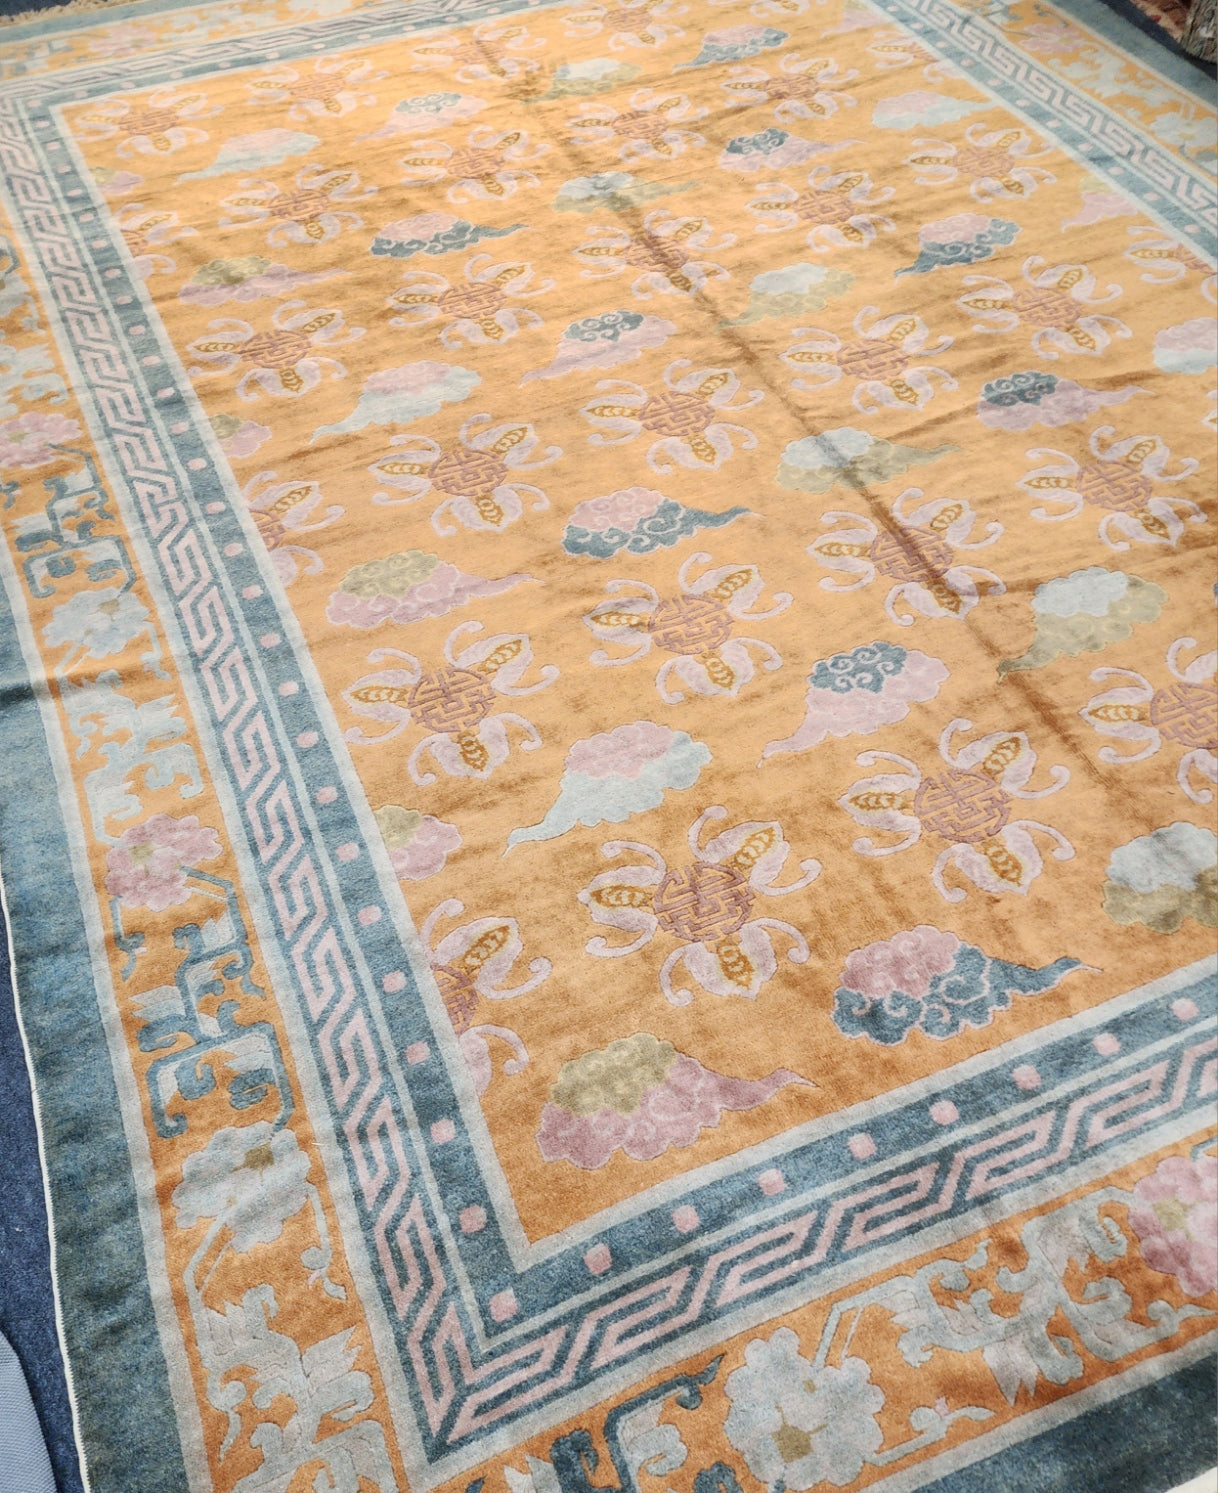 Original Unused Chinese Fette Rug from 1930s